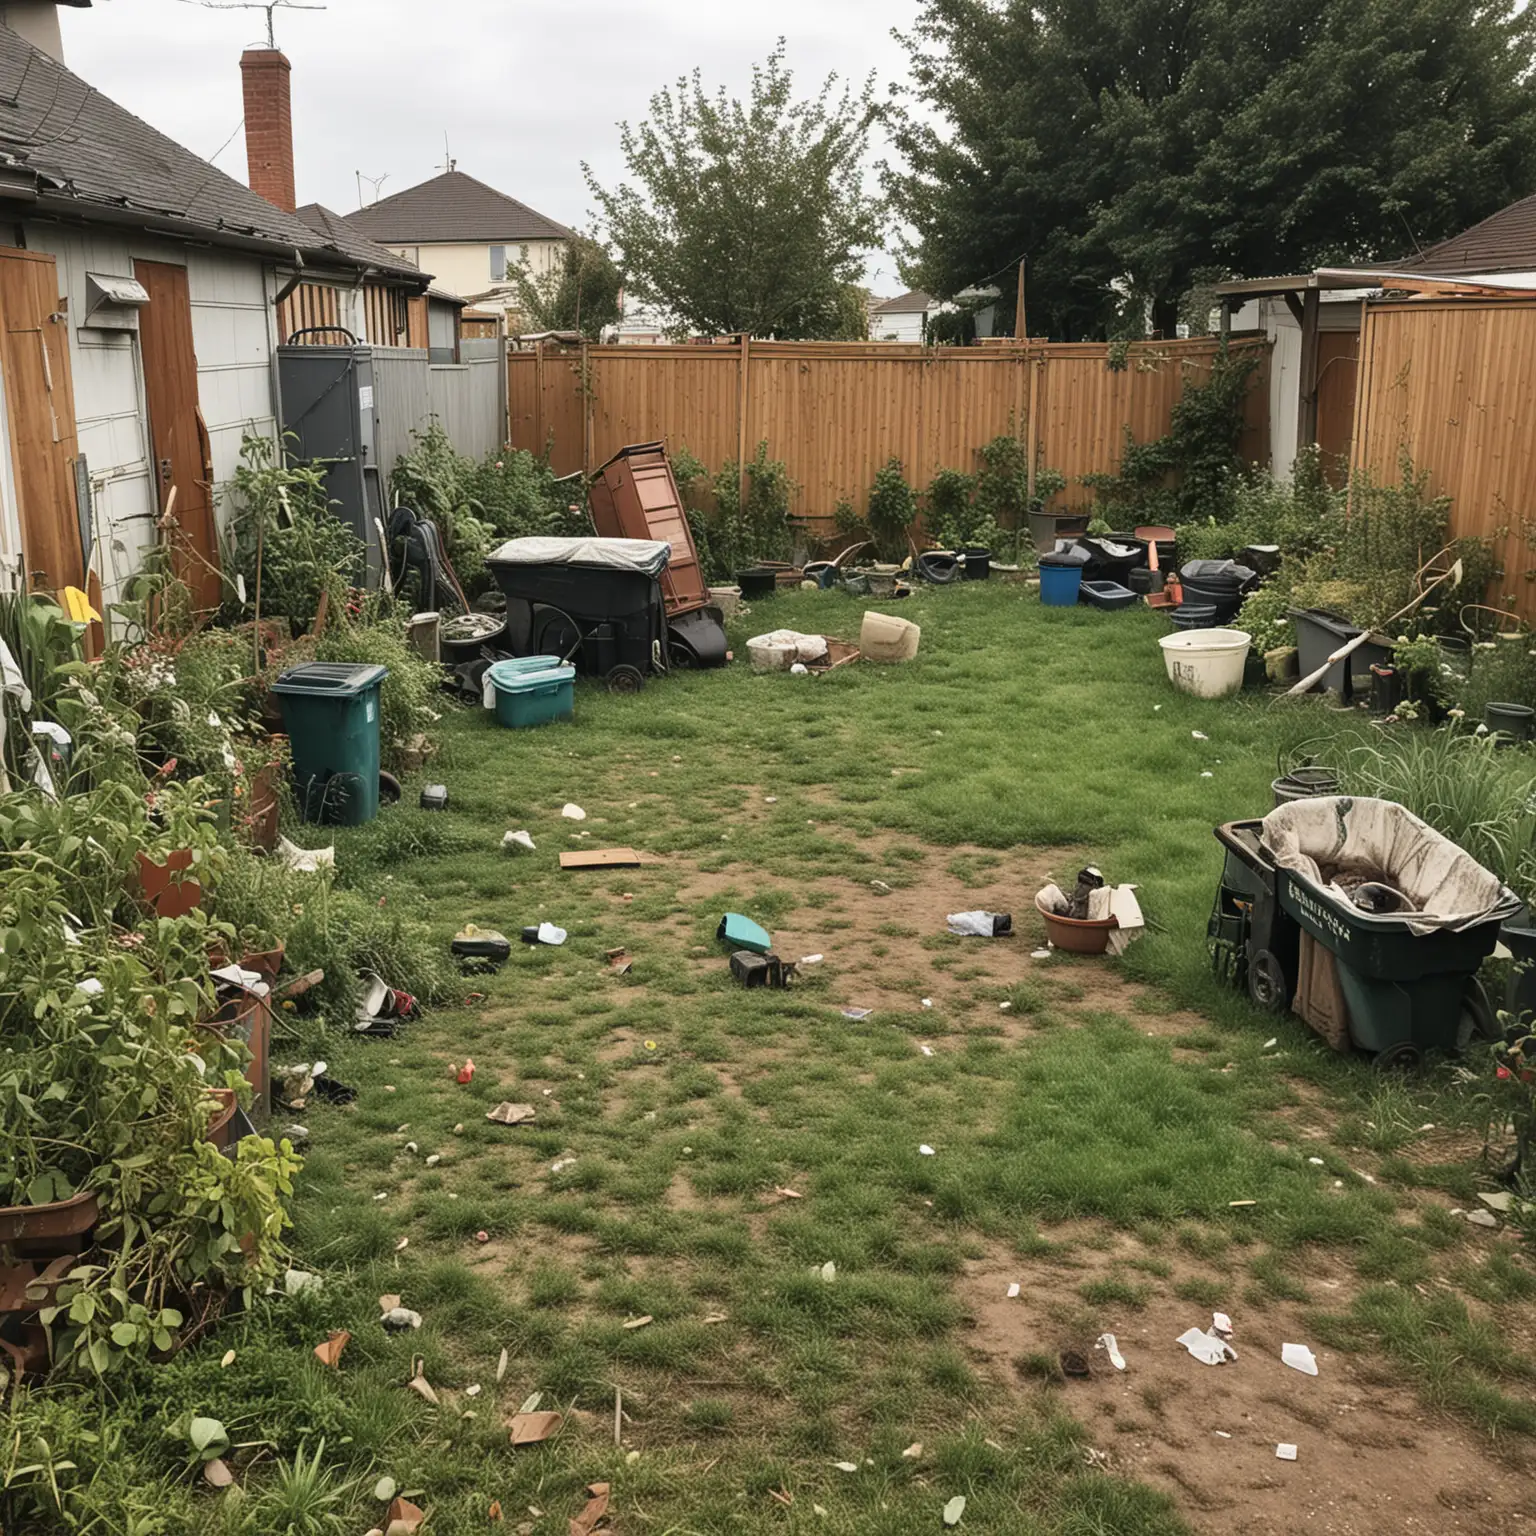 dirty, cluttered and filty yard